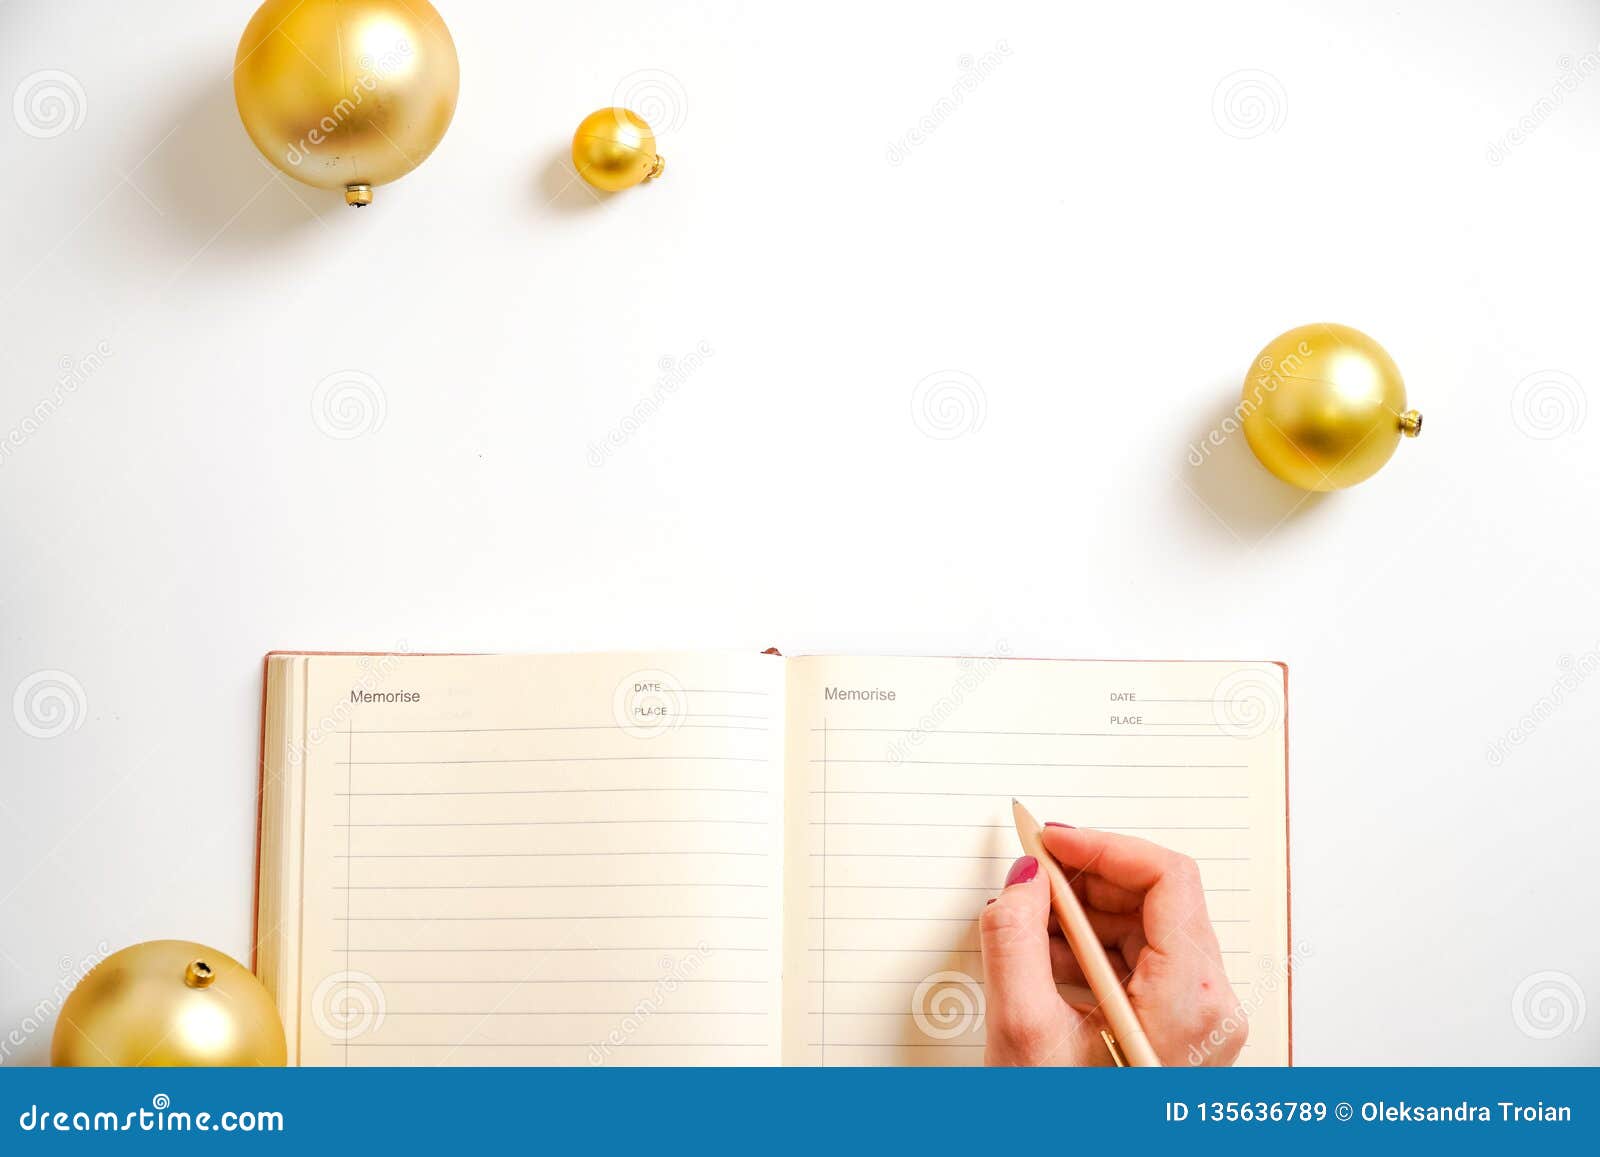 White Background Notepad Hand Writing New Year Resolution Golden Ball Planning Life Smart Goals Stock Image Image Of Flat Goal